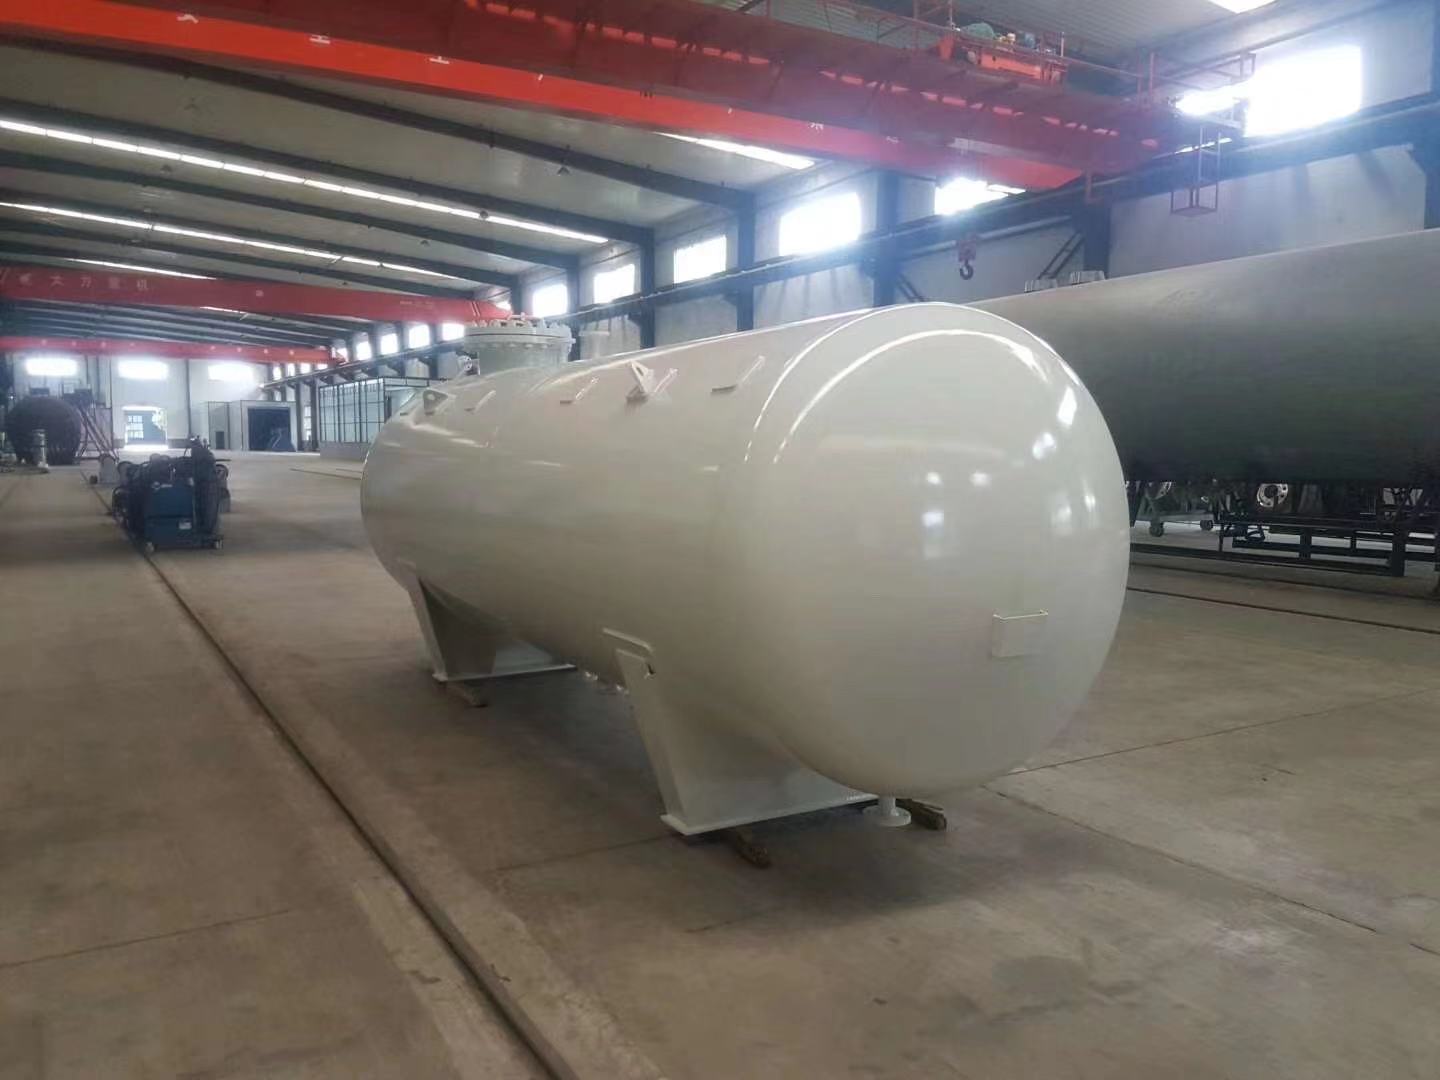 Liquefied gas storage tanks are safe to use